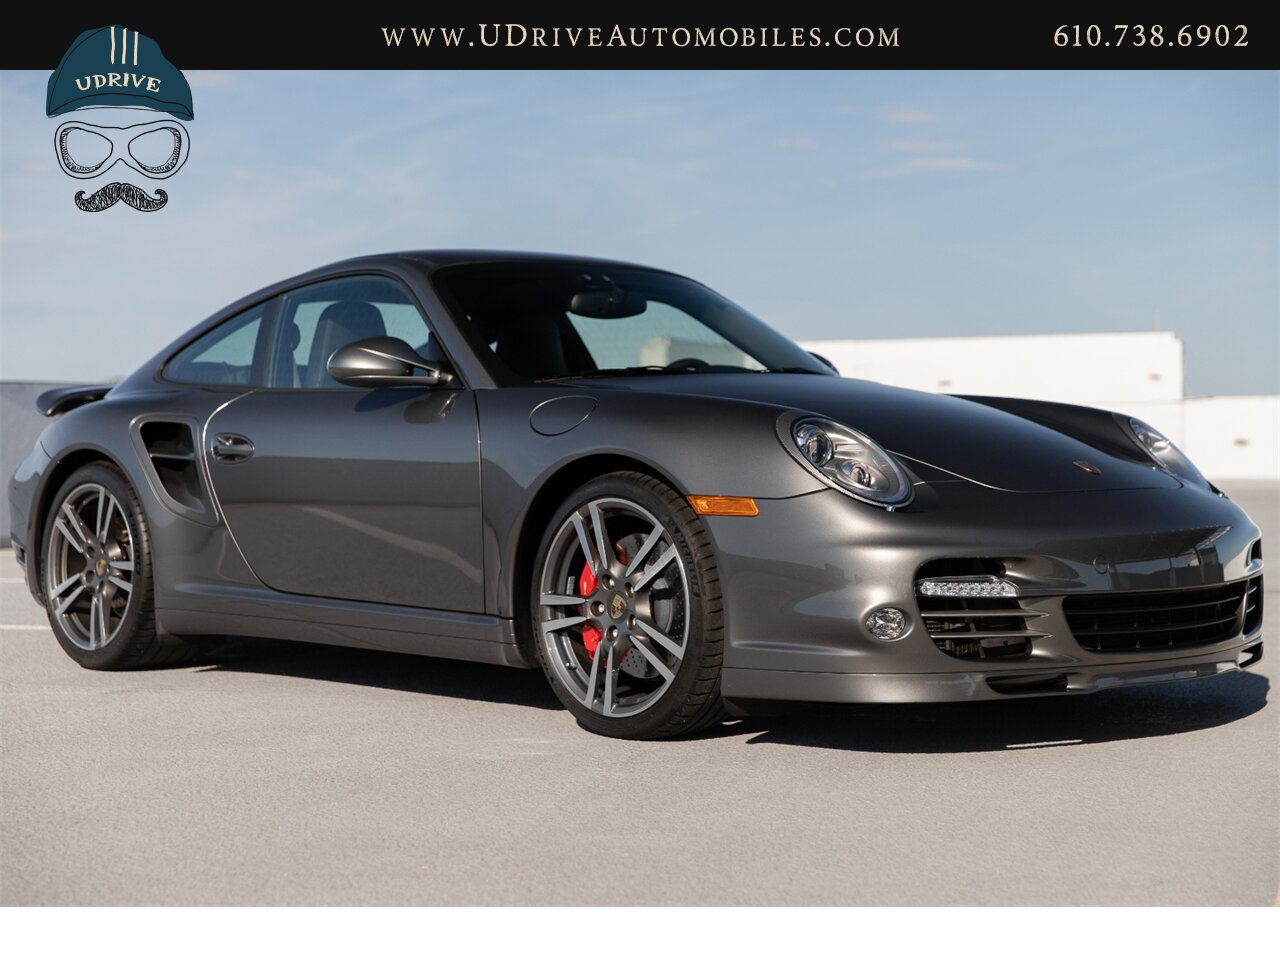 2012 Porsche 911 Turbo 6 Speed Manual 1 Owner 15k Miles PTV  Adaptive Sport Seats Sport Shifter 997.2 Extremely Rare - Photo 15 - West Chester, PA 19382